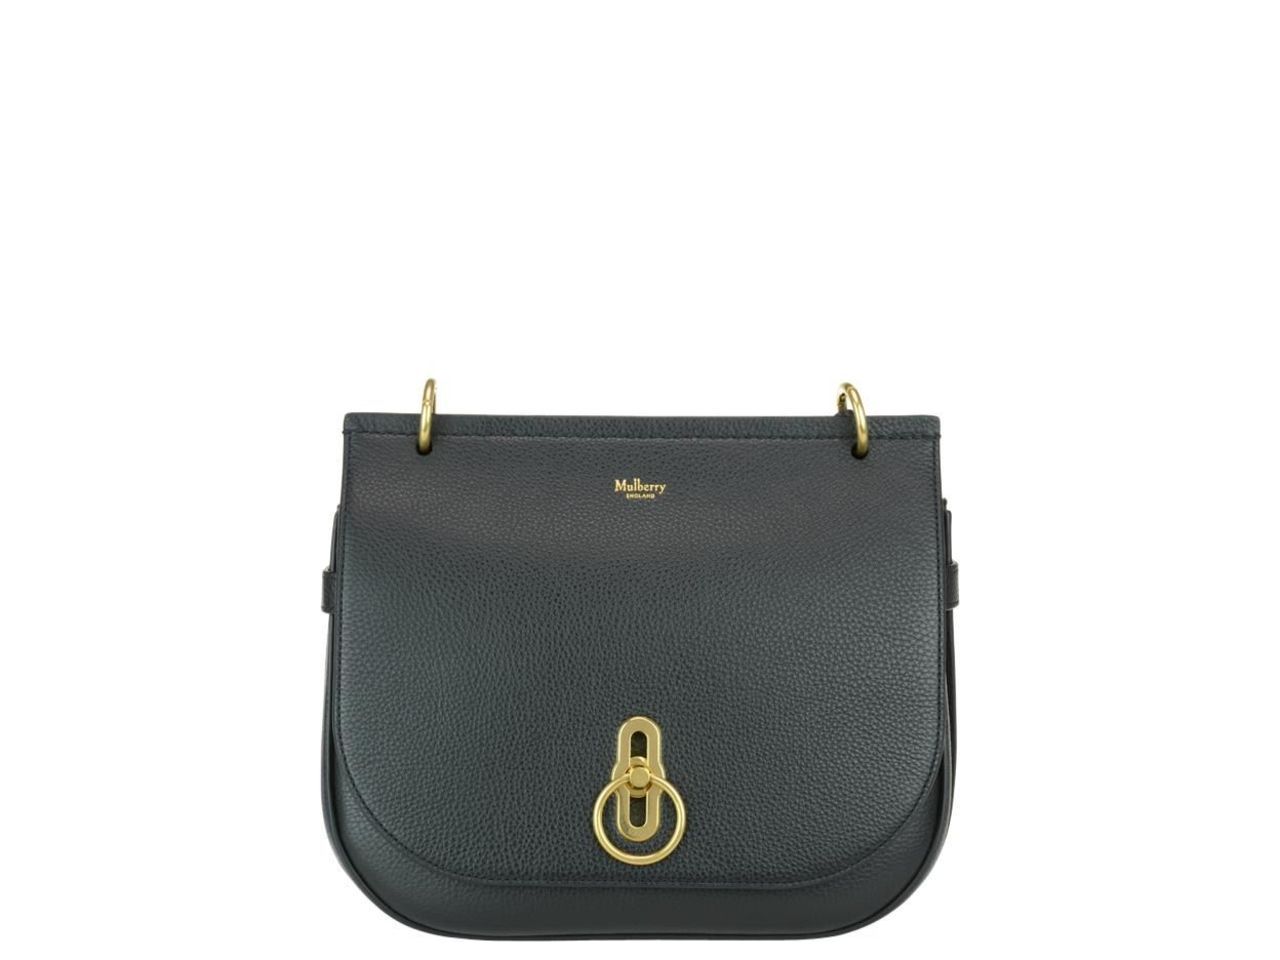 Mulberry Small Amberley Satchel Bag